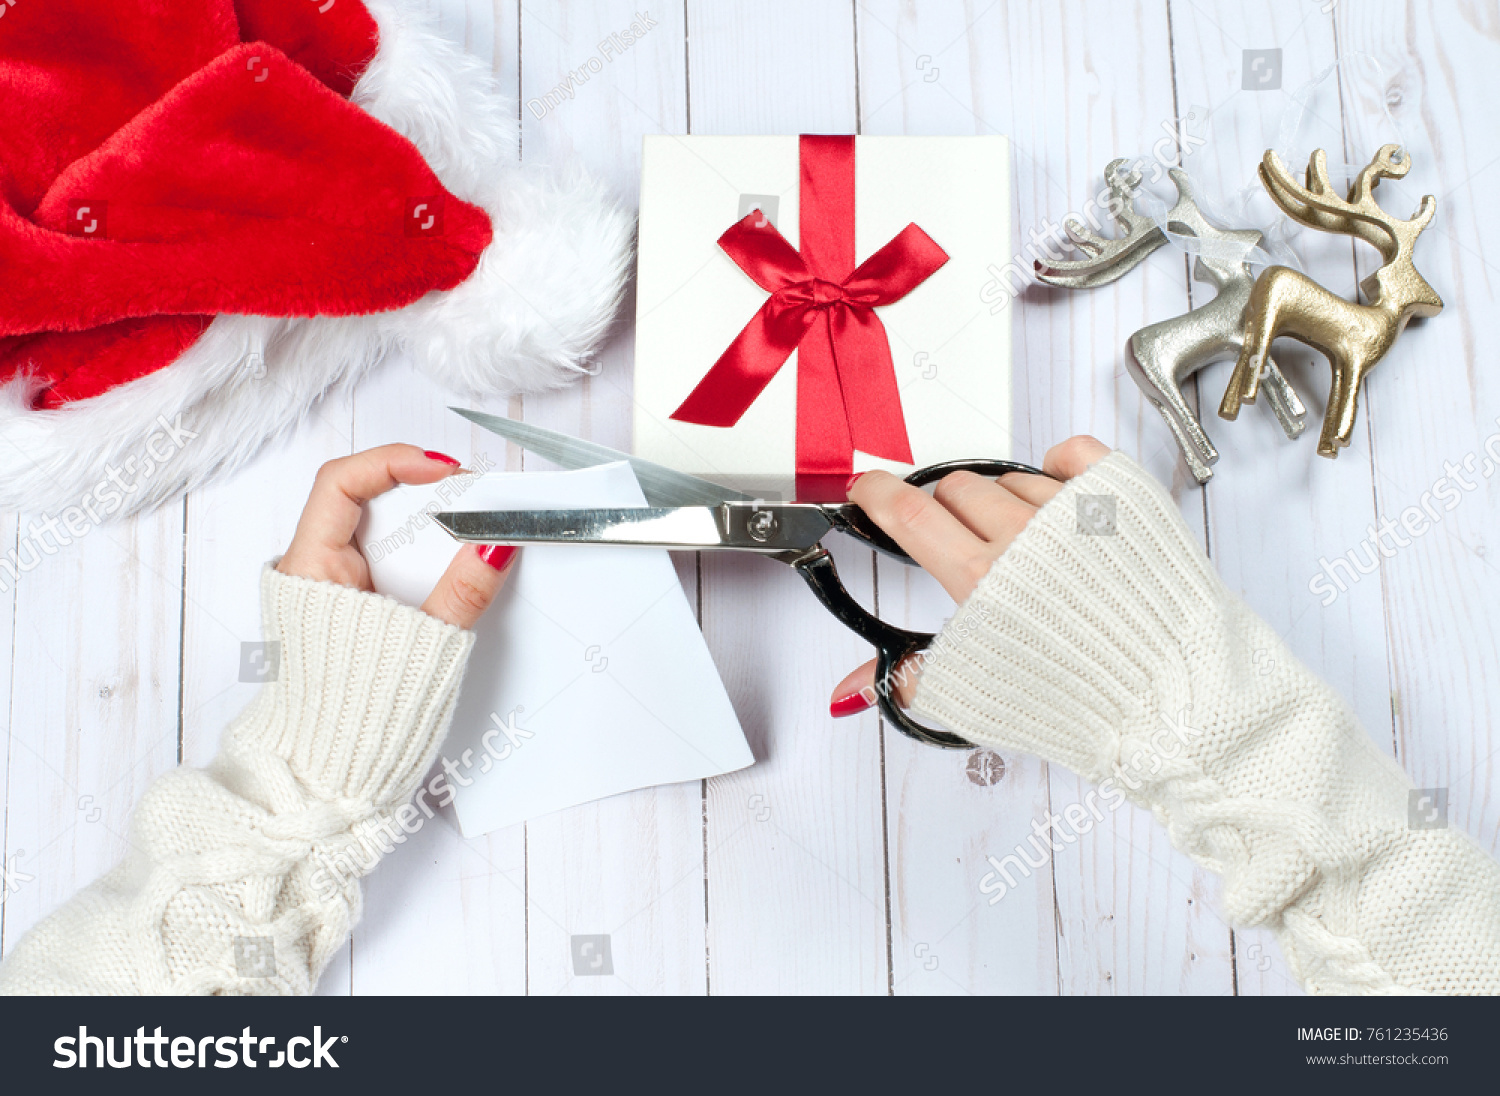 Christmas and New Year gift. Woman holding Christmas presents on a wooden table background #761235436